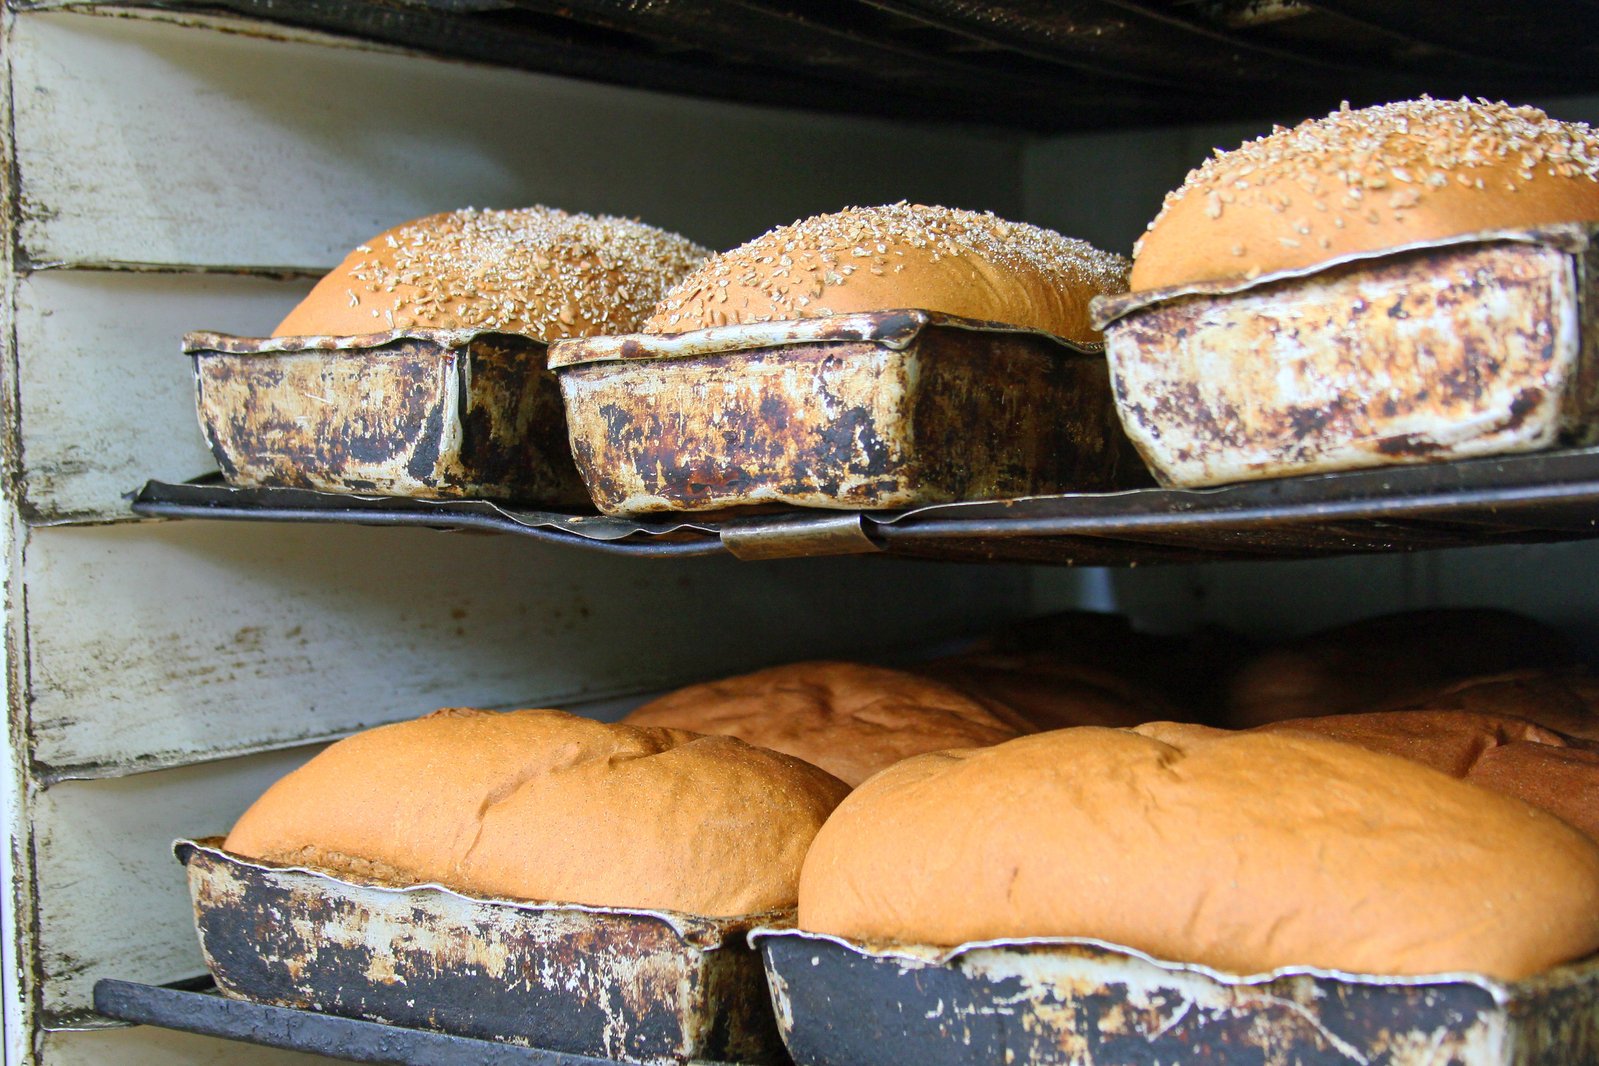 several buns of breads sitting on shelves with white frosting